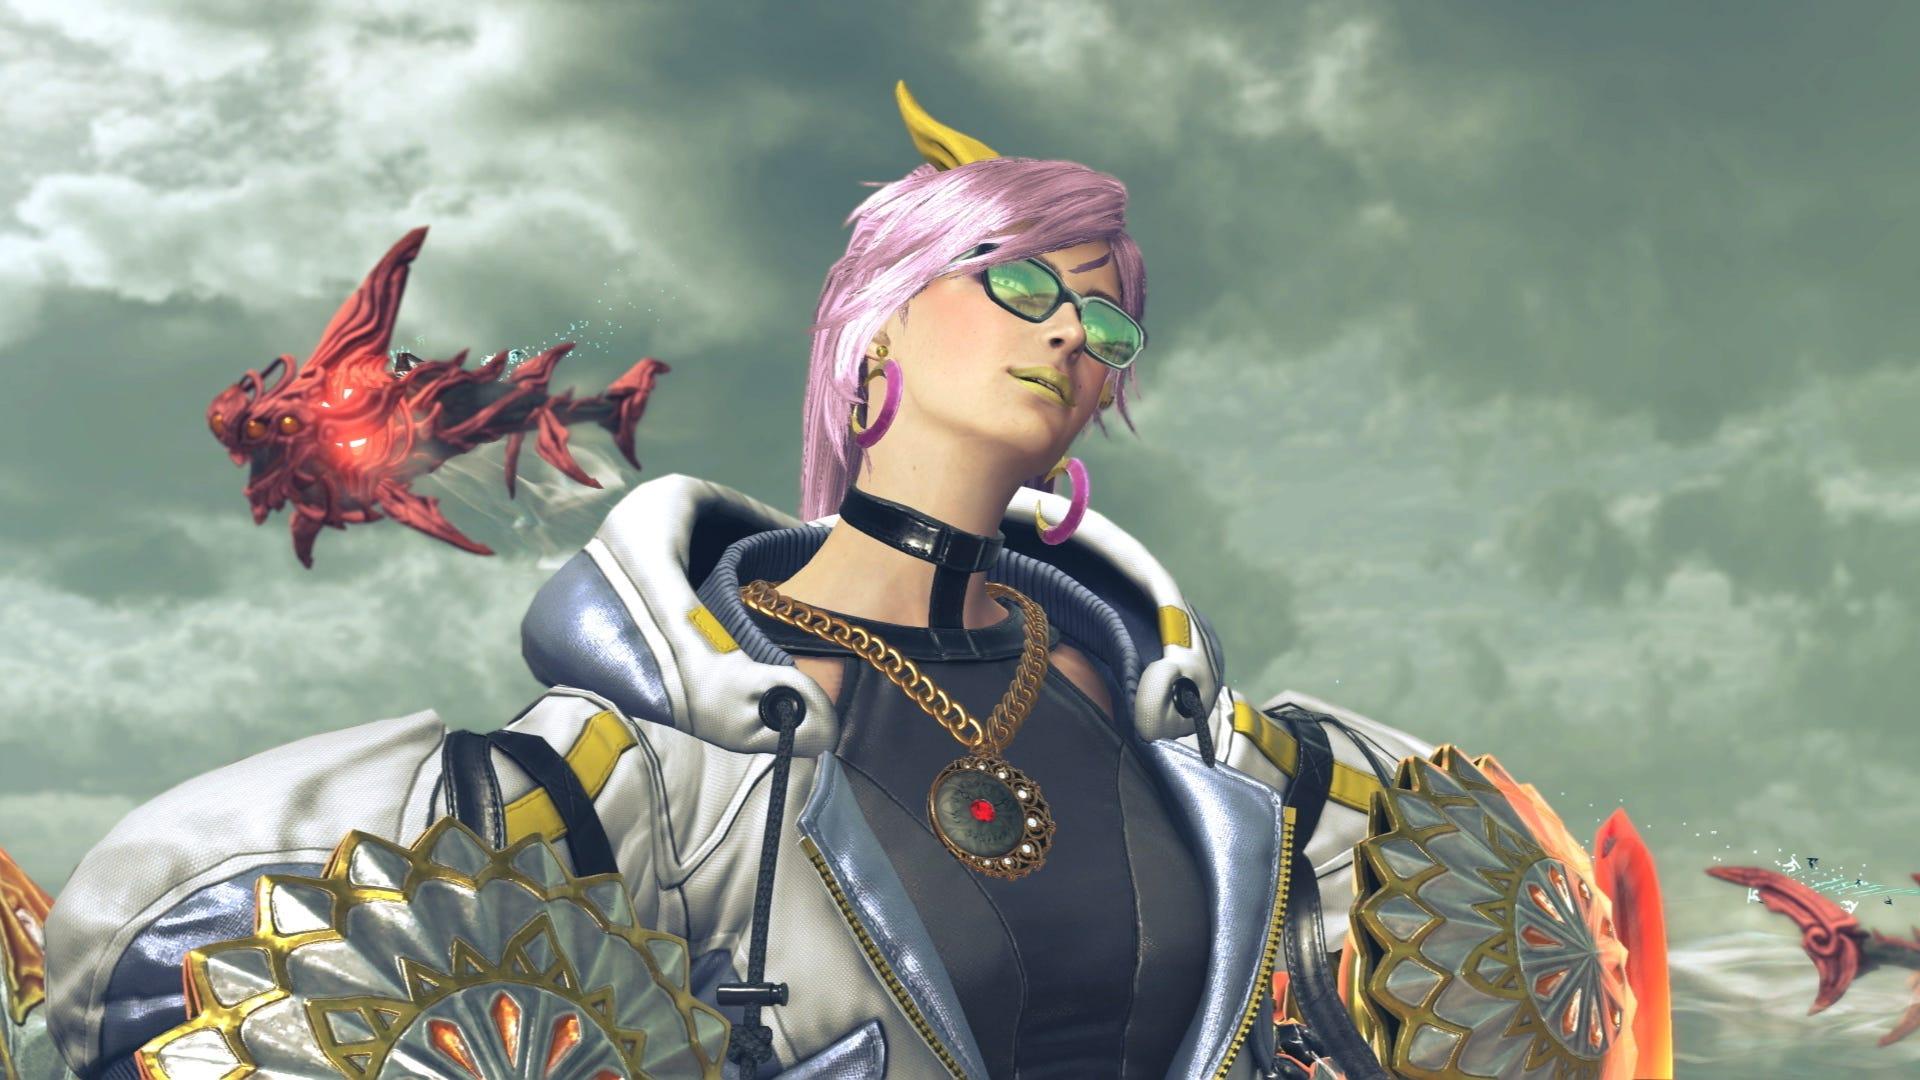 A screenshot from Bayonetta 3 for the Nintendo Switch.